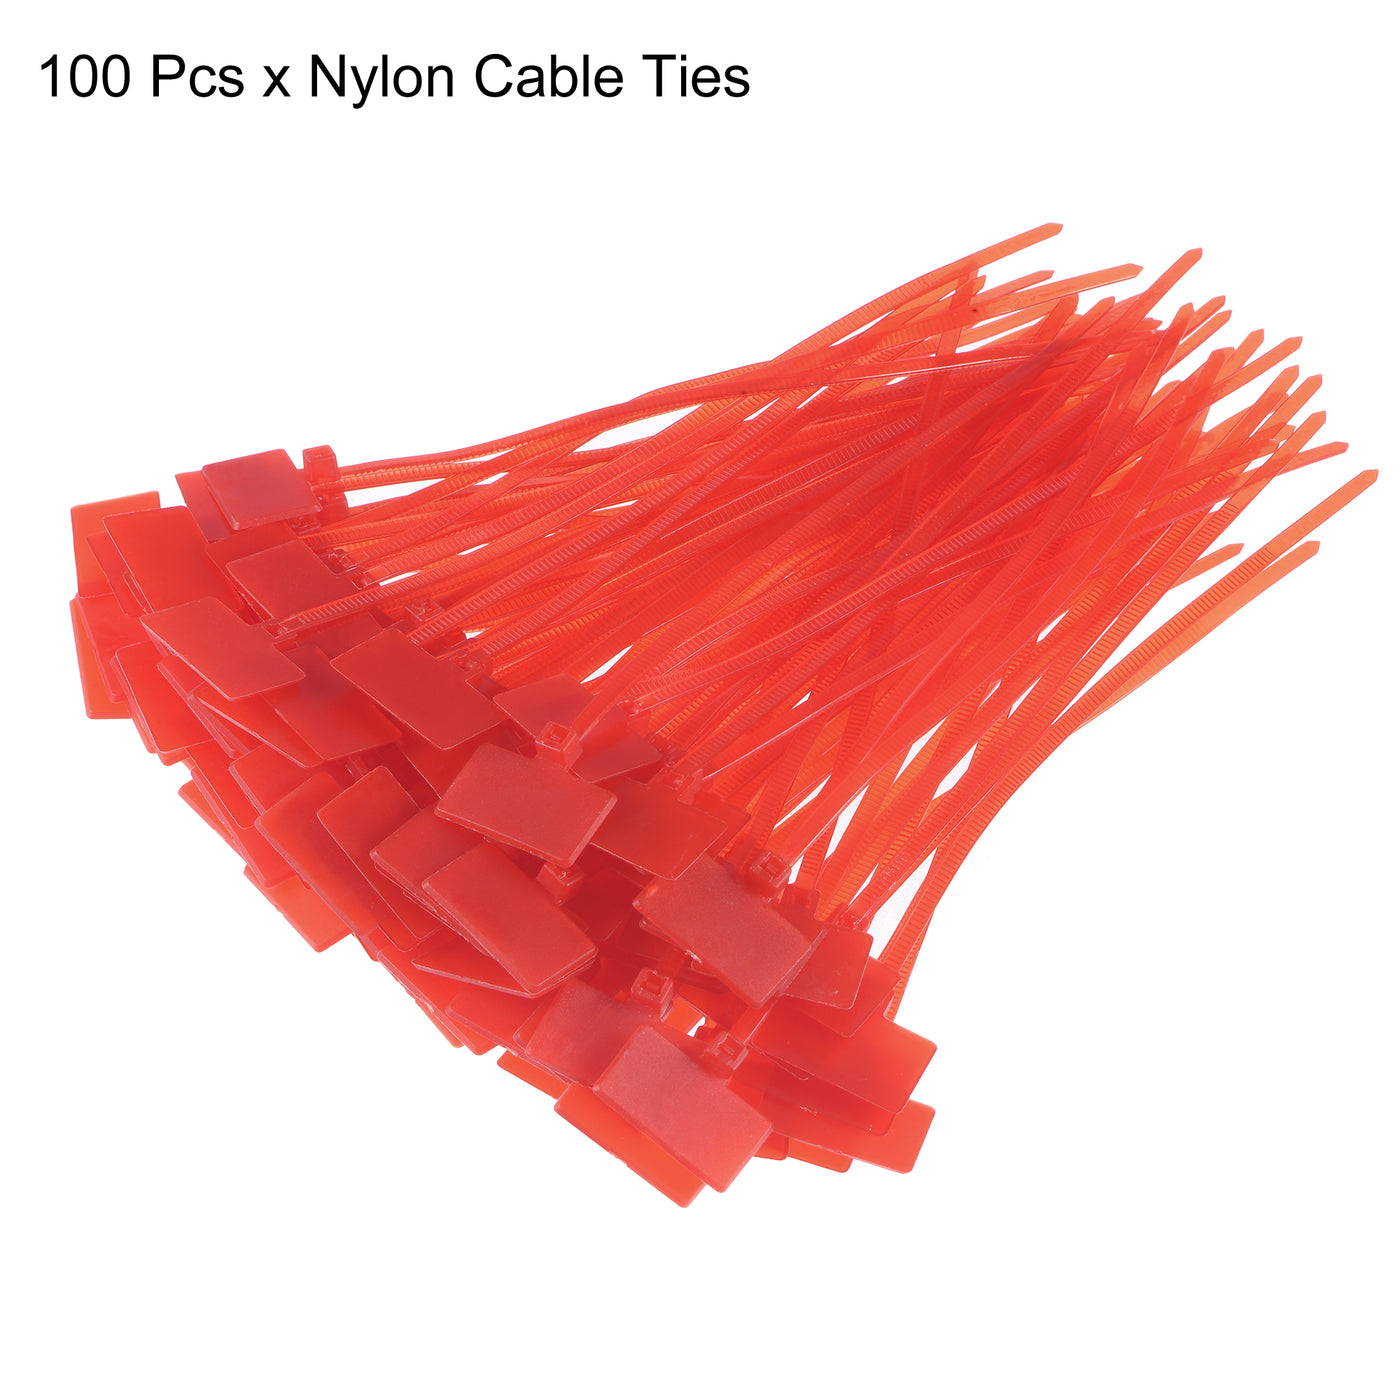 uxcell Uxcell 100pcs Nylon Cable Ties Tags Label Marker Self-Locking for Marking Organizing Red